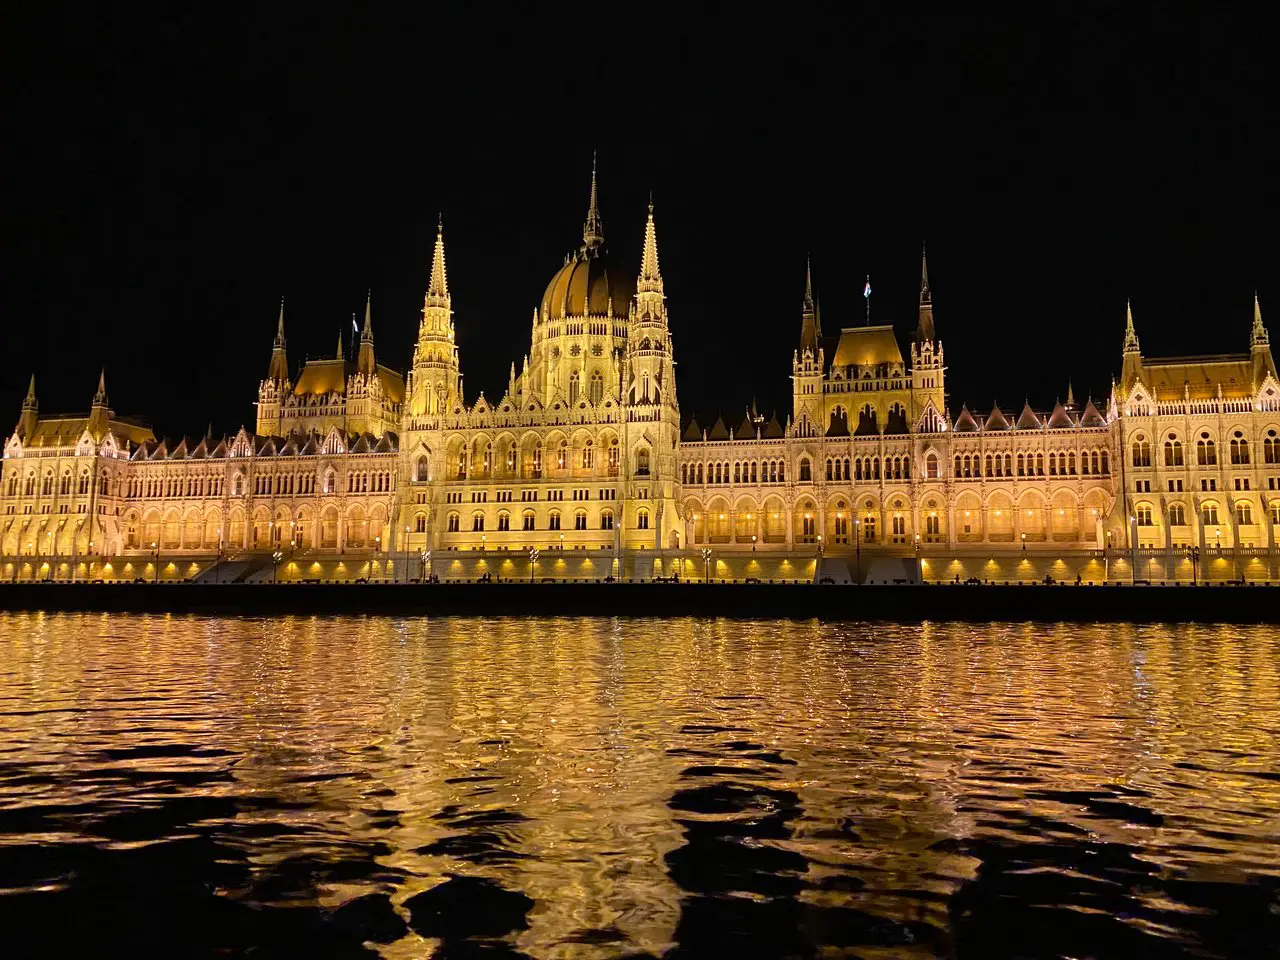 View of Hungarian Parliament at night on a cruise in Budapest